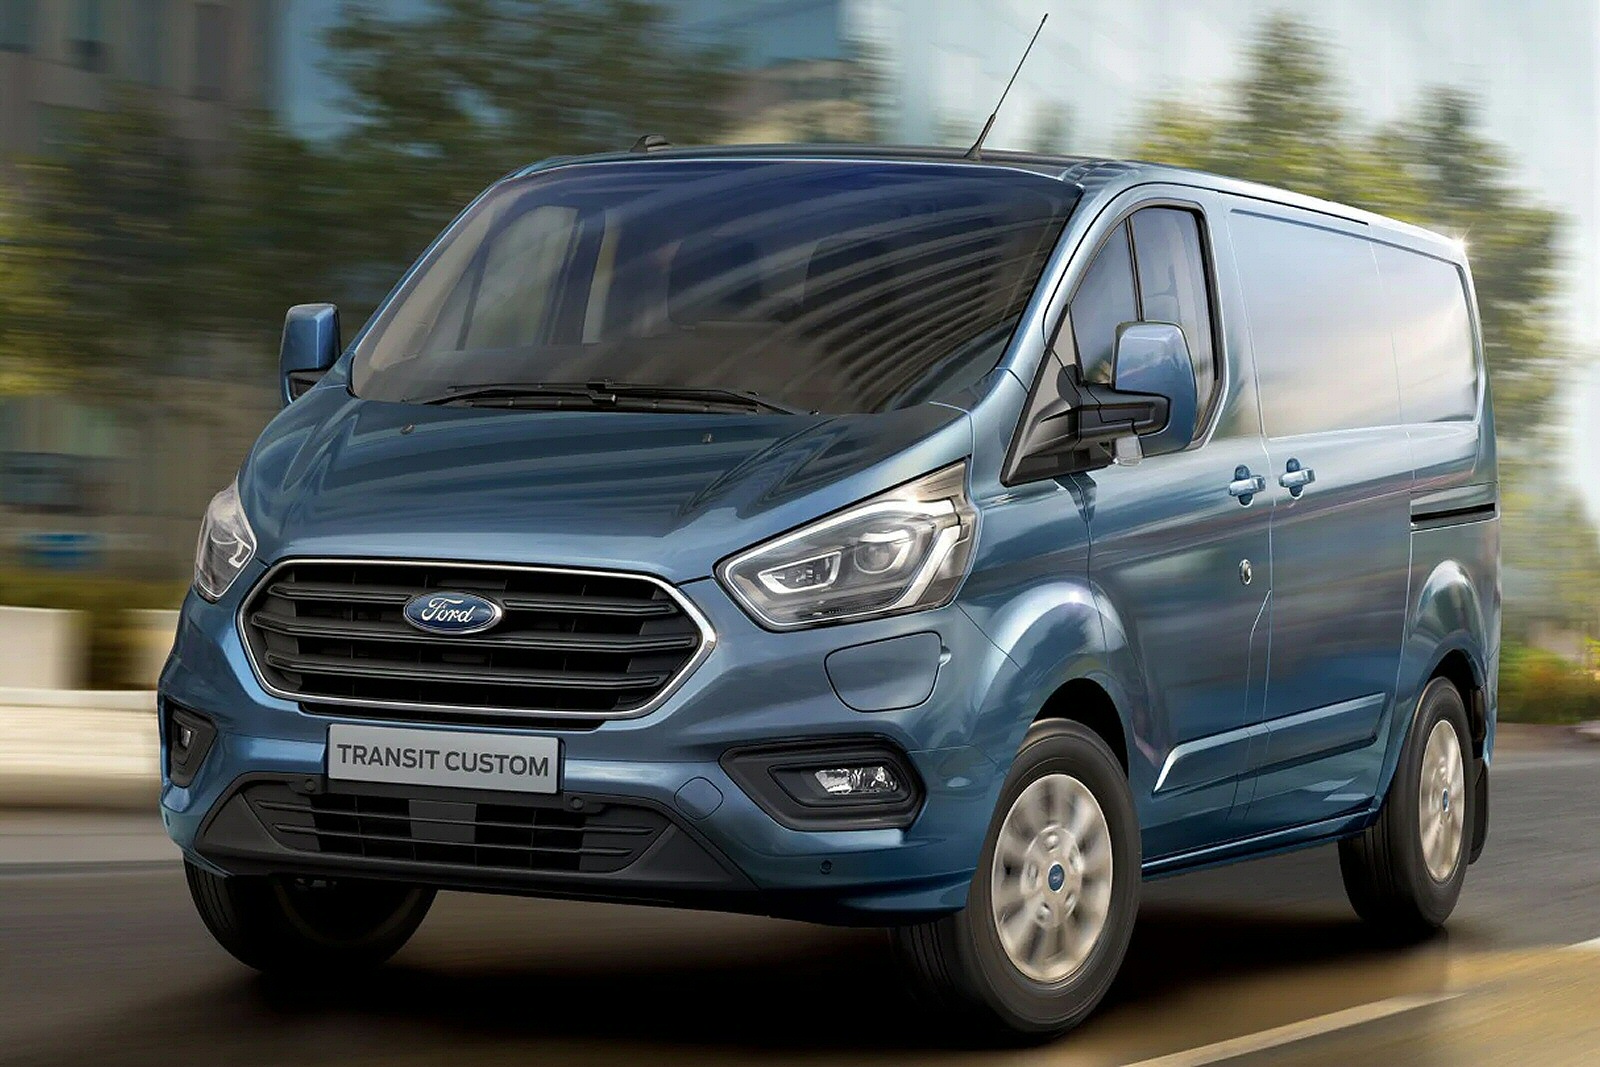 FORD TRANSIT CUSTOM Leasing & Contract Hire